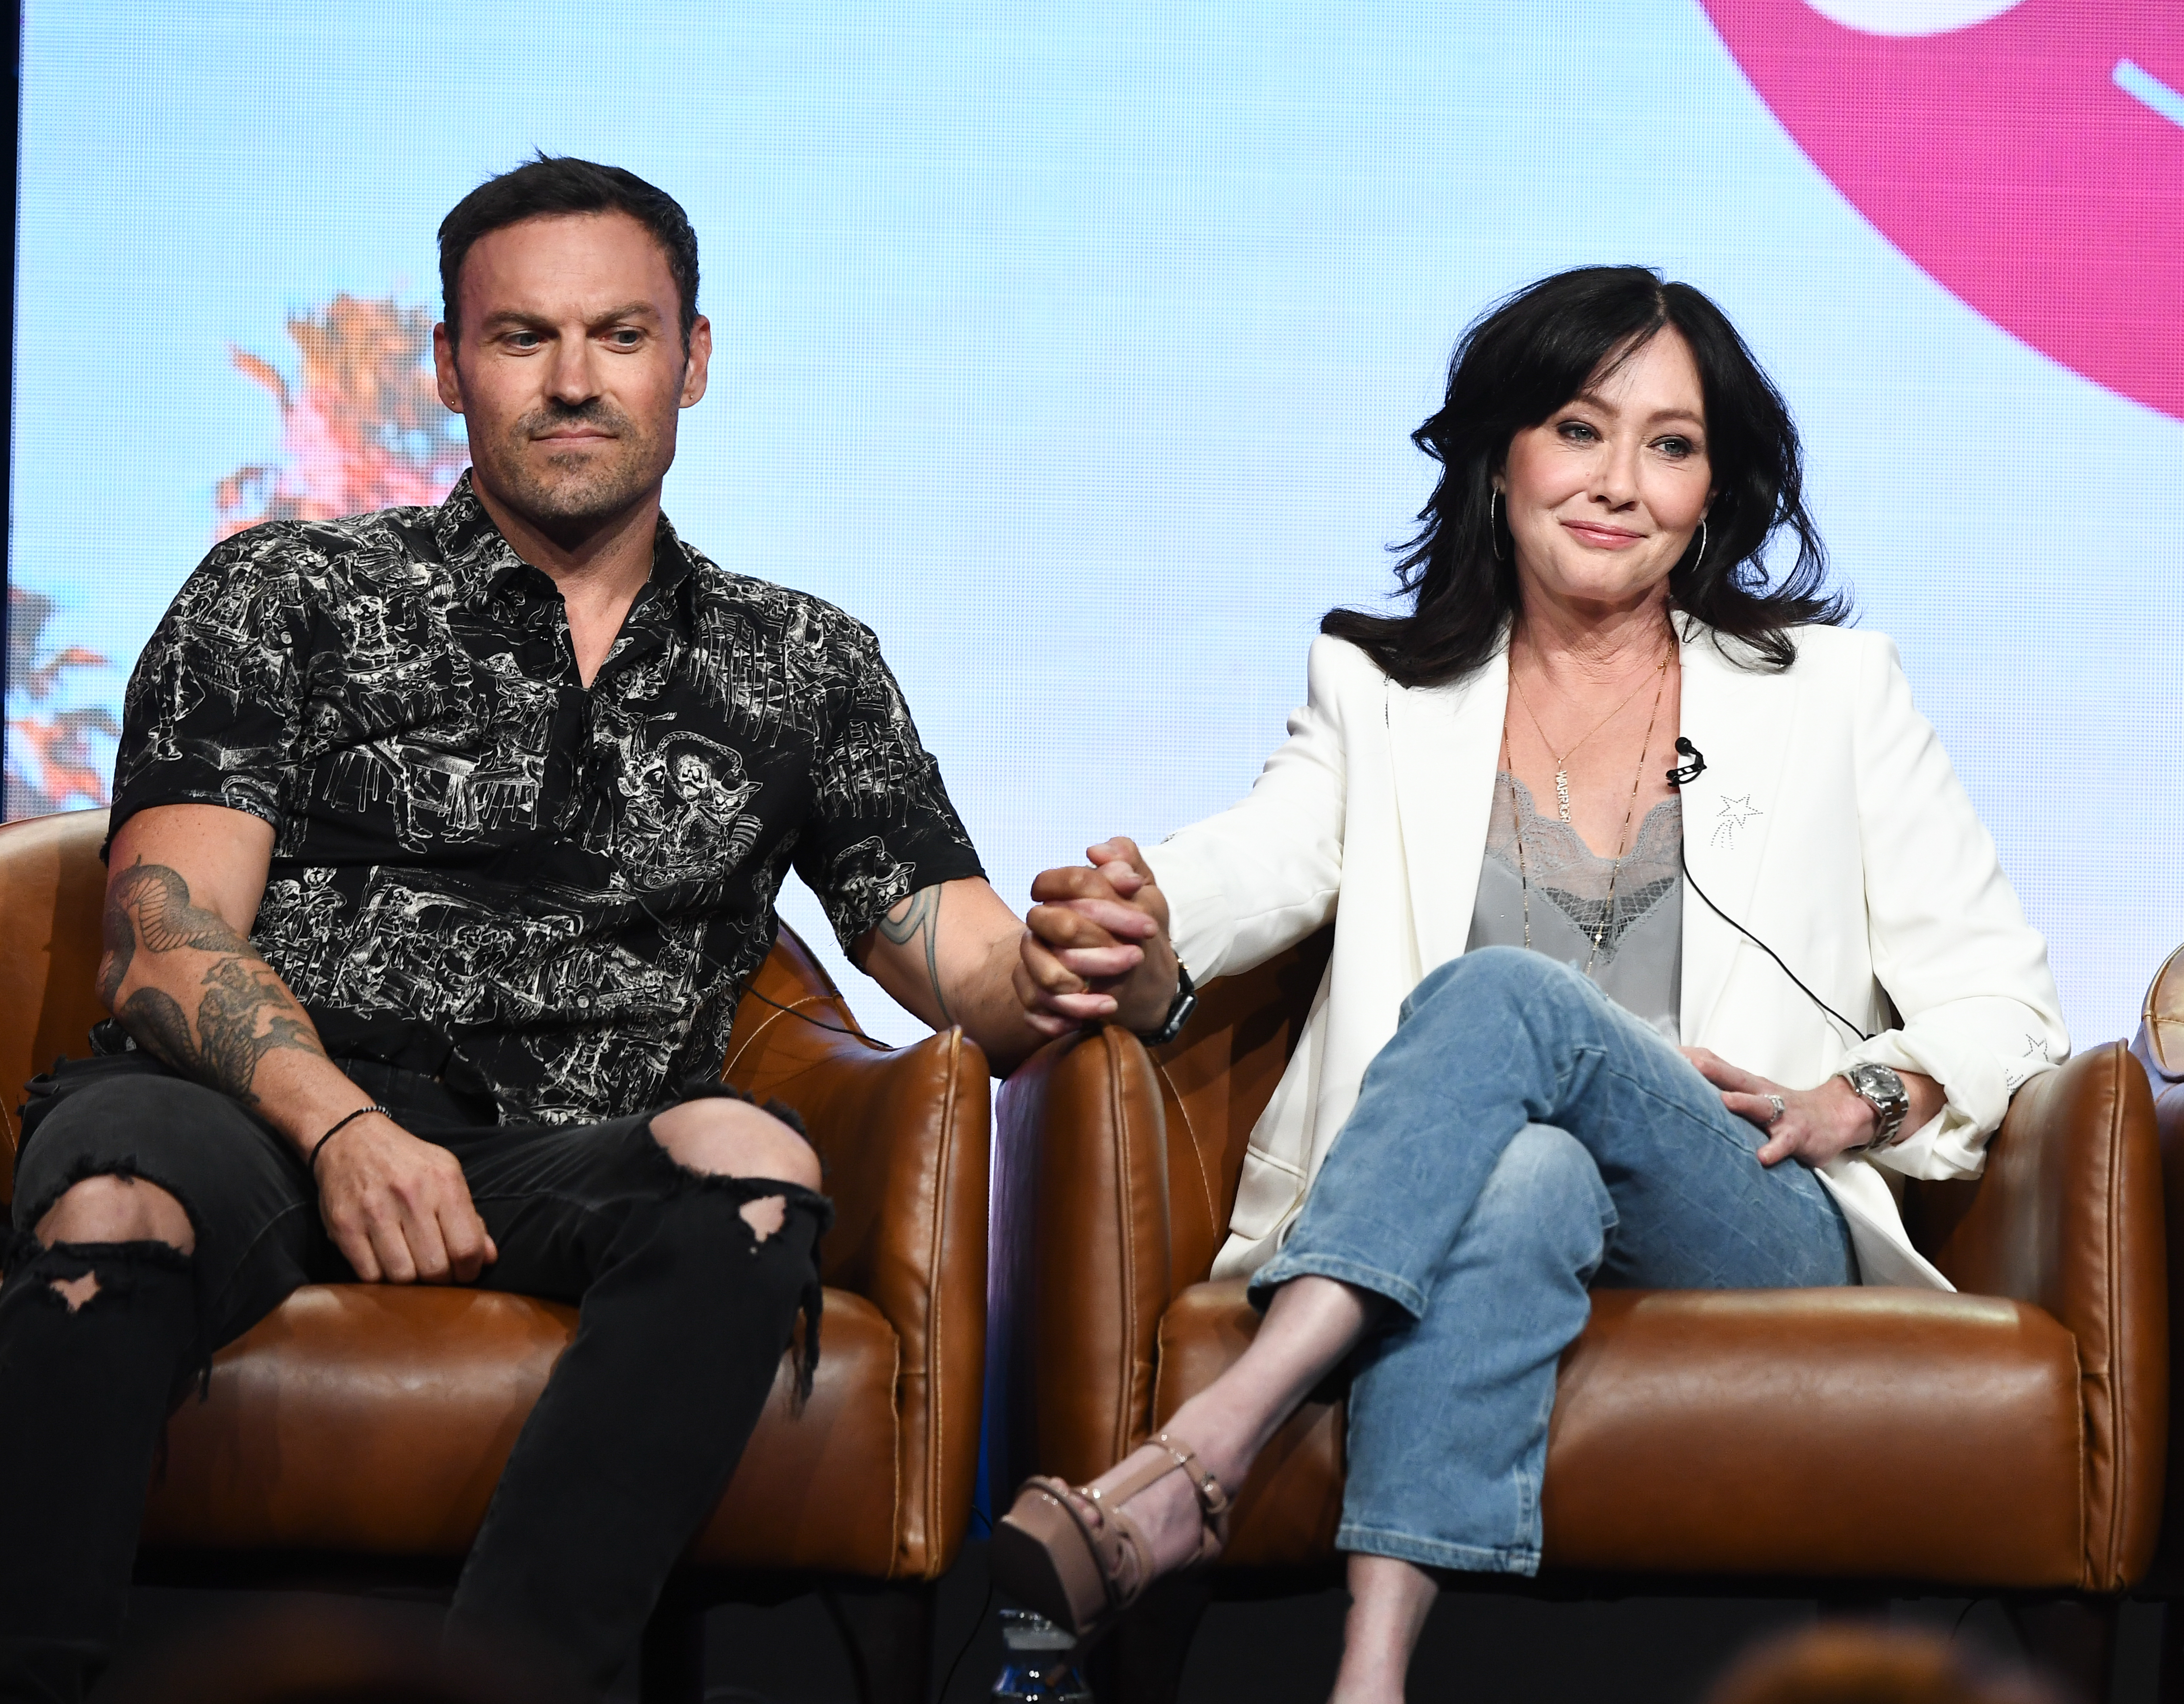 Brian Austin Green and Shannen Doherty onstage during "BH90210'" TV show panel, TCA Summer Press Tour on August 7, 2019 in Los Angeles | Source: Getty Images